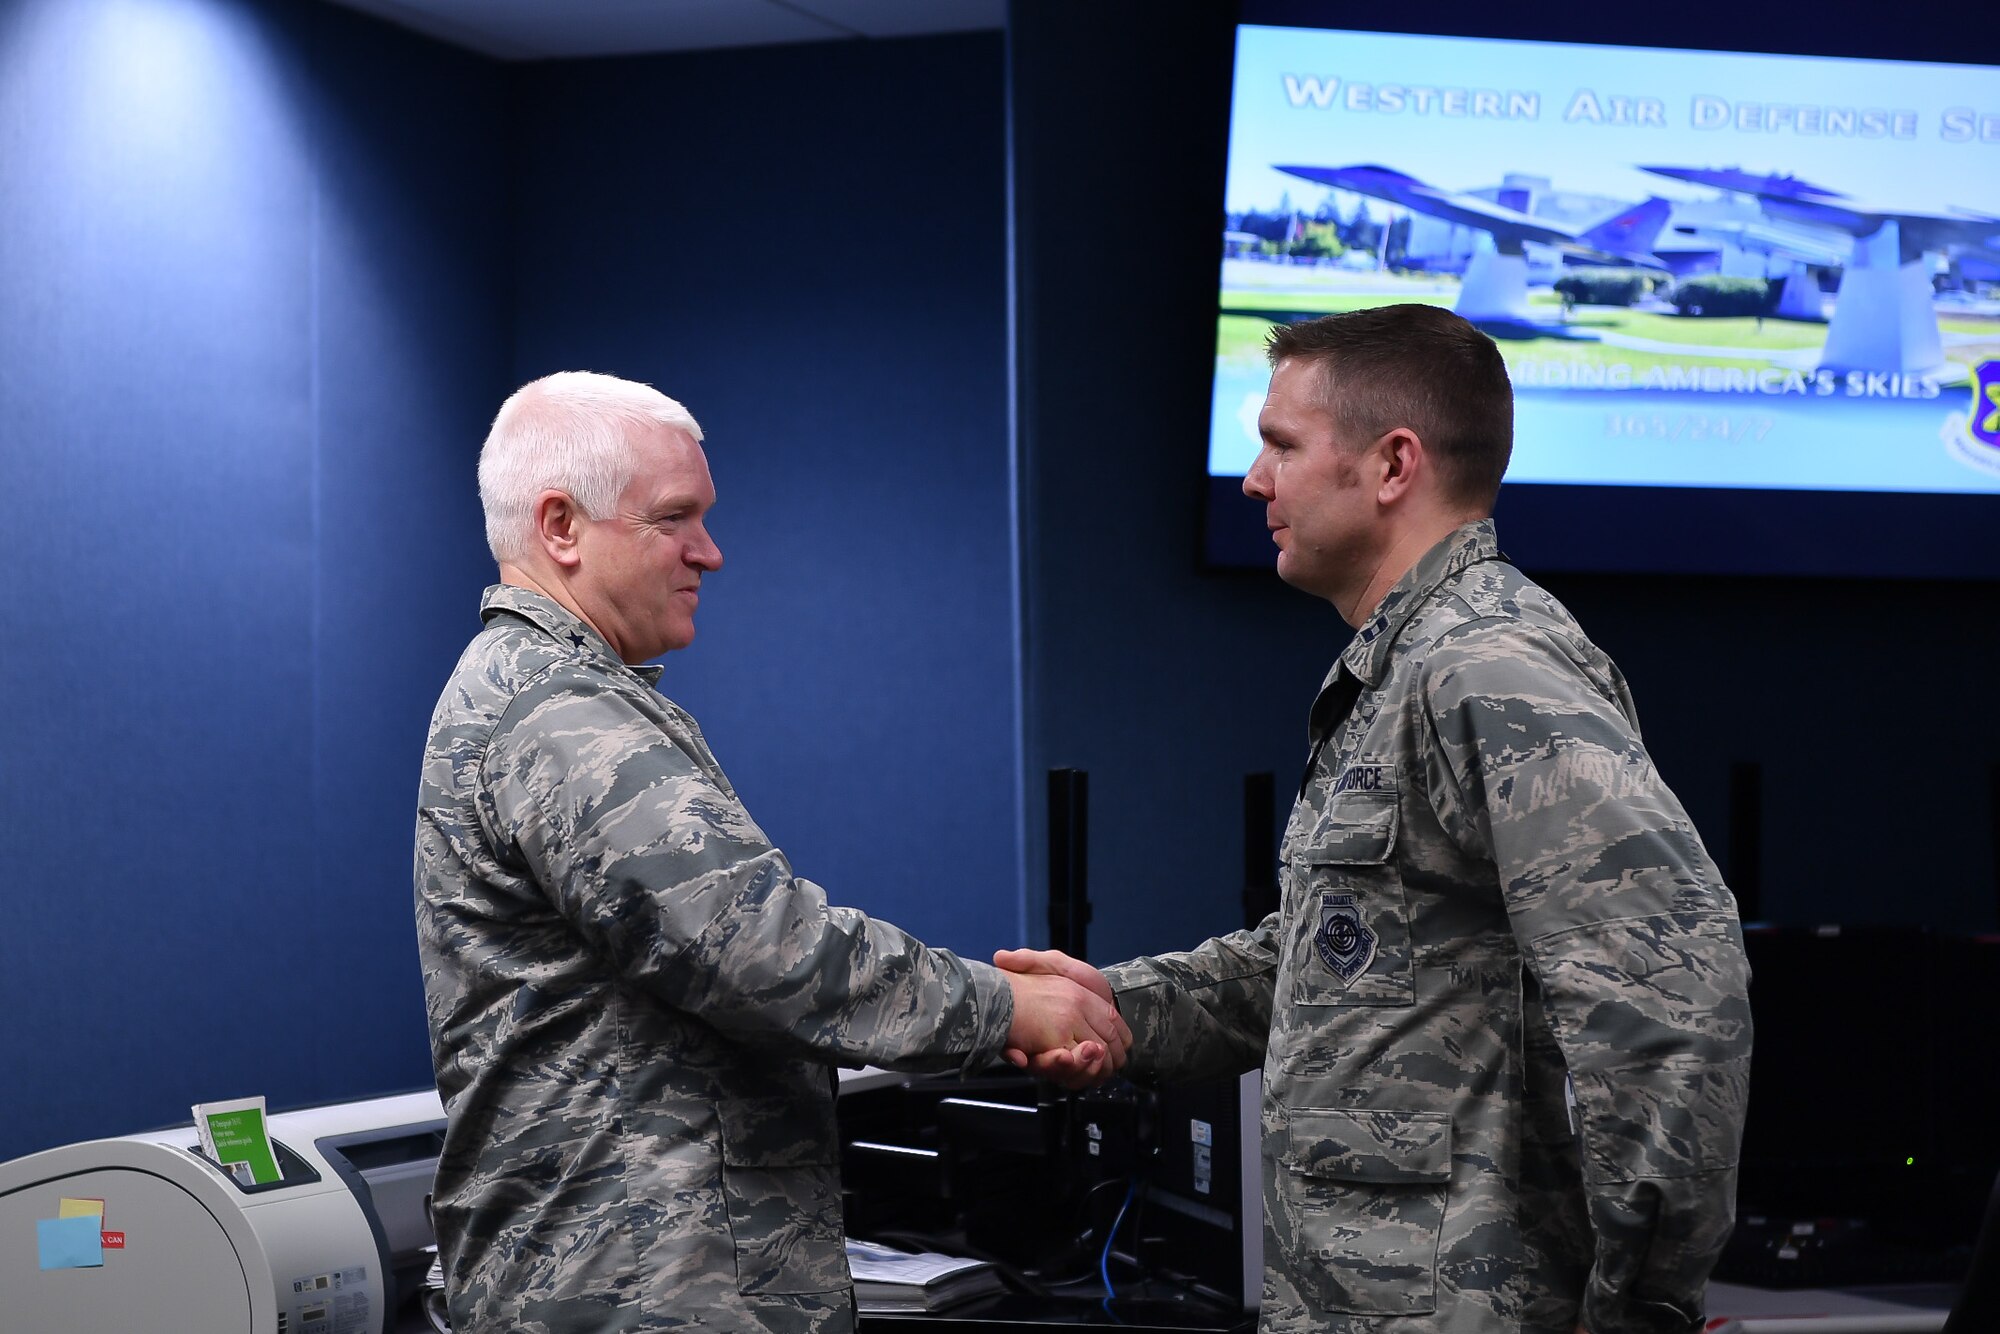 Lt. Gen. L. Scott Rice, Director of the Air National Guard, recognizes Capt. Peter Hickman, 225th Air Defense Squadron, for recently being named a U.S. Air Force Weapons School Top Graduate and First Air Force Command and Control Warrior of the Year.  Rice spent the day visiting two Washington Air National Guard units:  the Western Air Defense Sector at Joint Base Lewis-McChord and the 194th Wing at Camp Murray. (U.S. Air Force photo by Kimberly D. Burke)